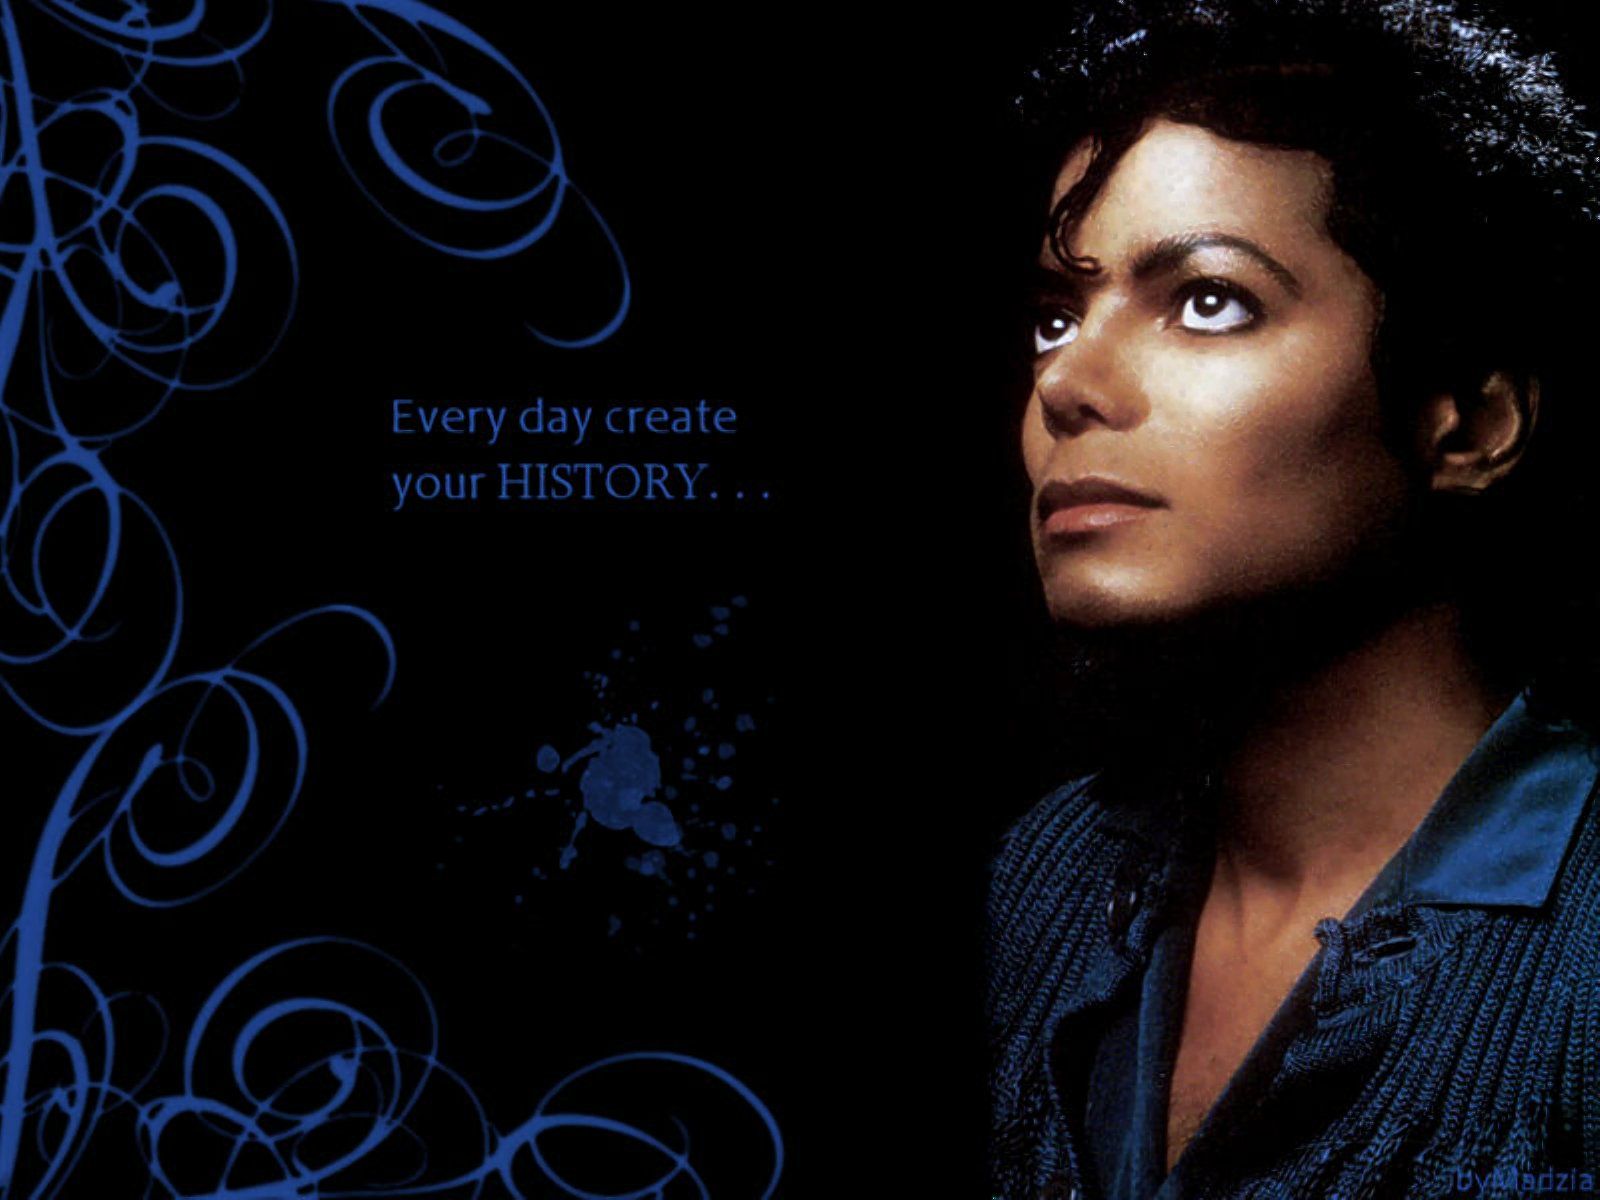 Michael Jackson Image HD Wallpaper And Background Photos